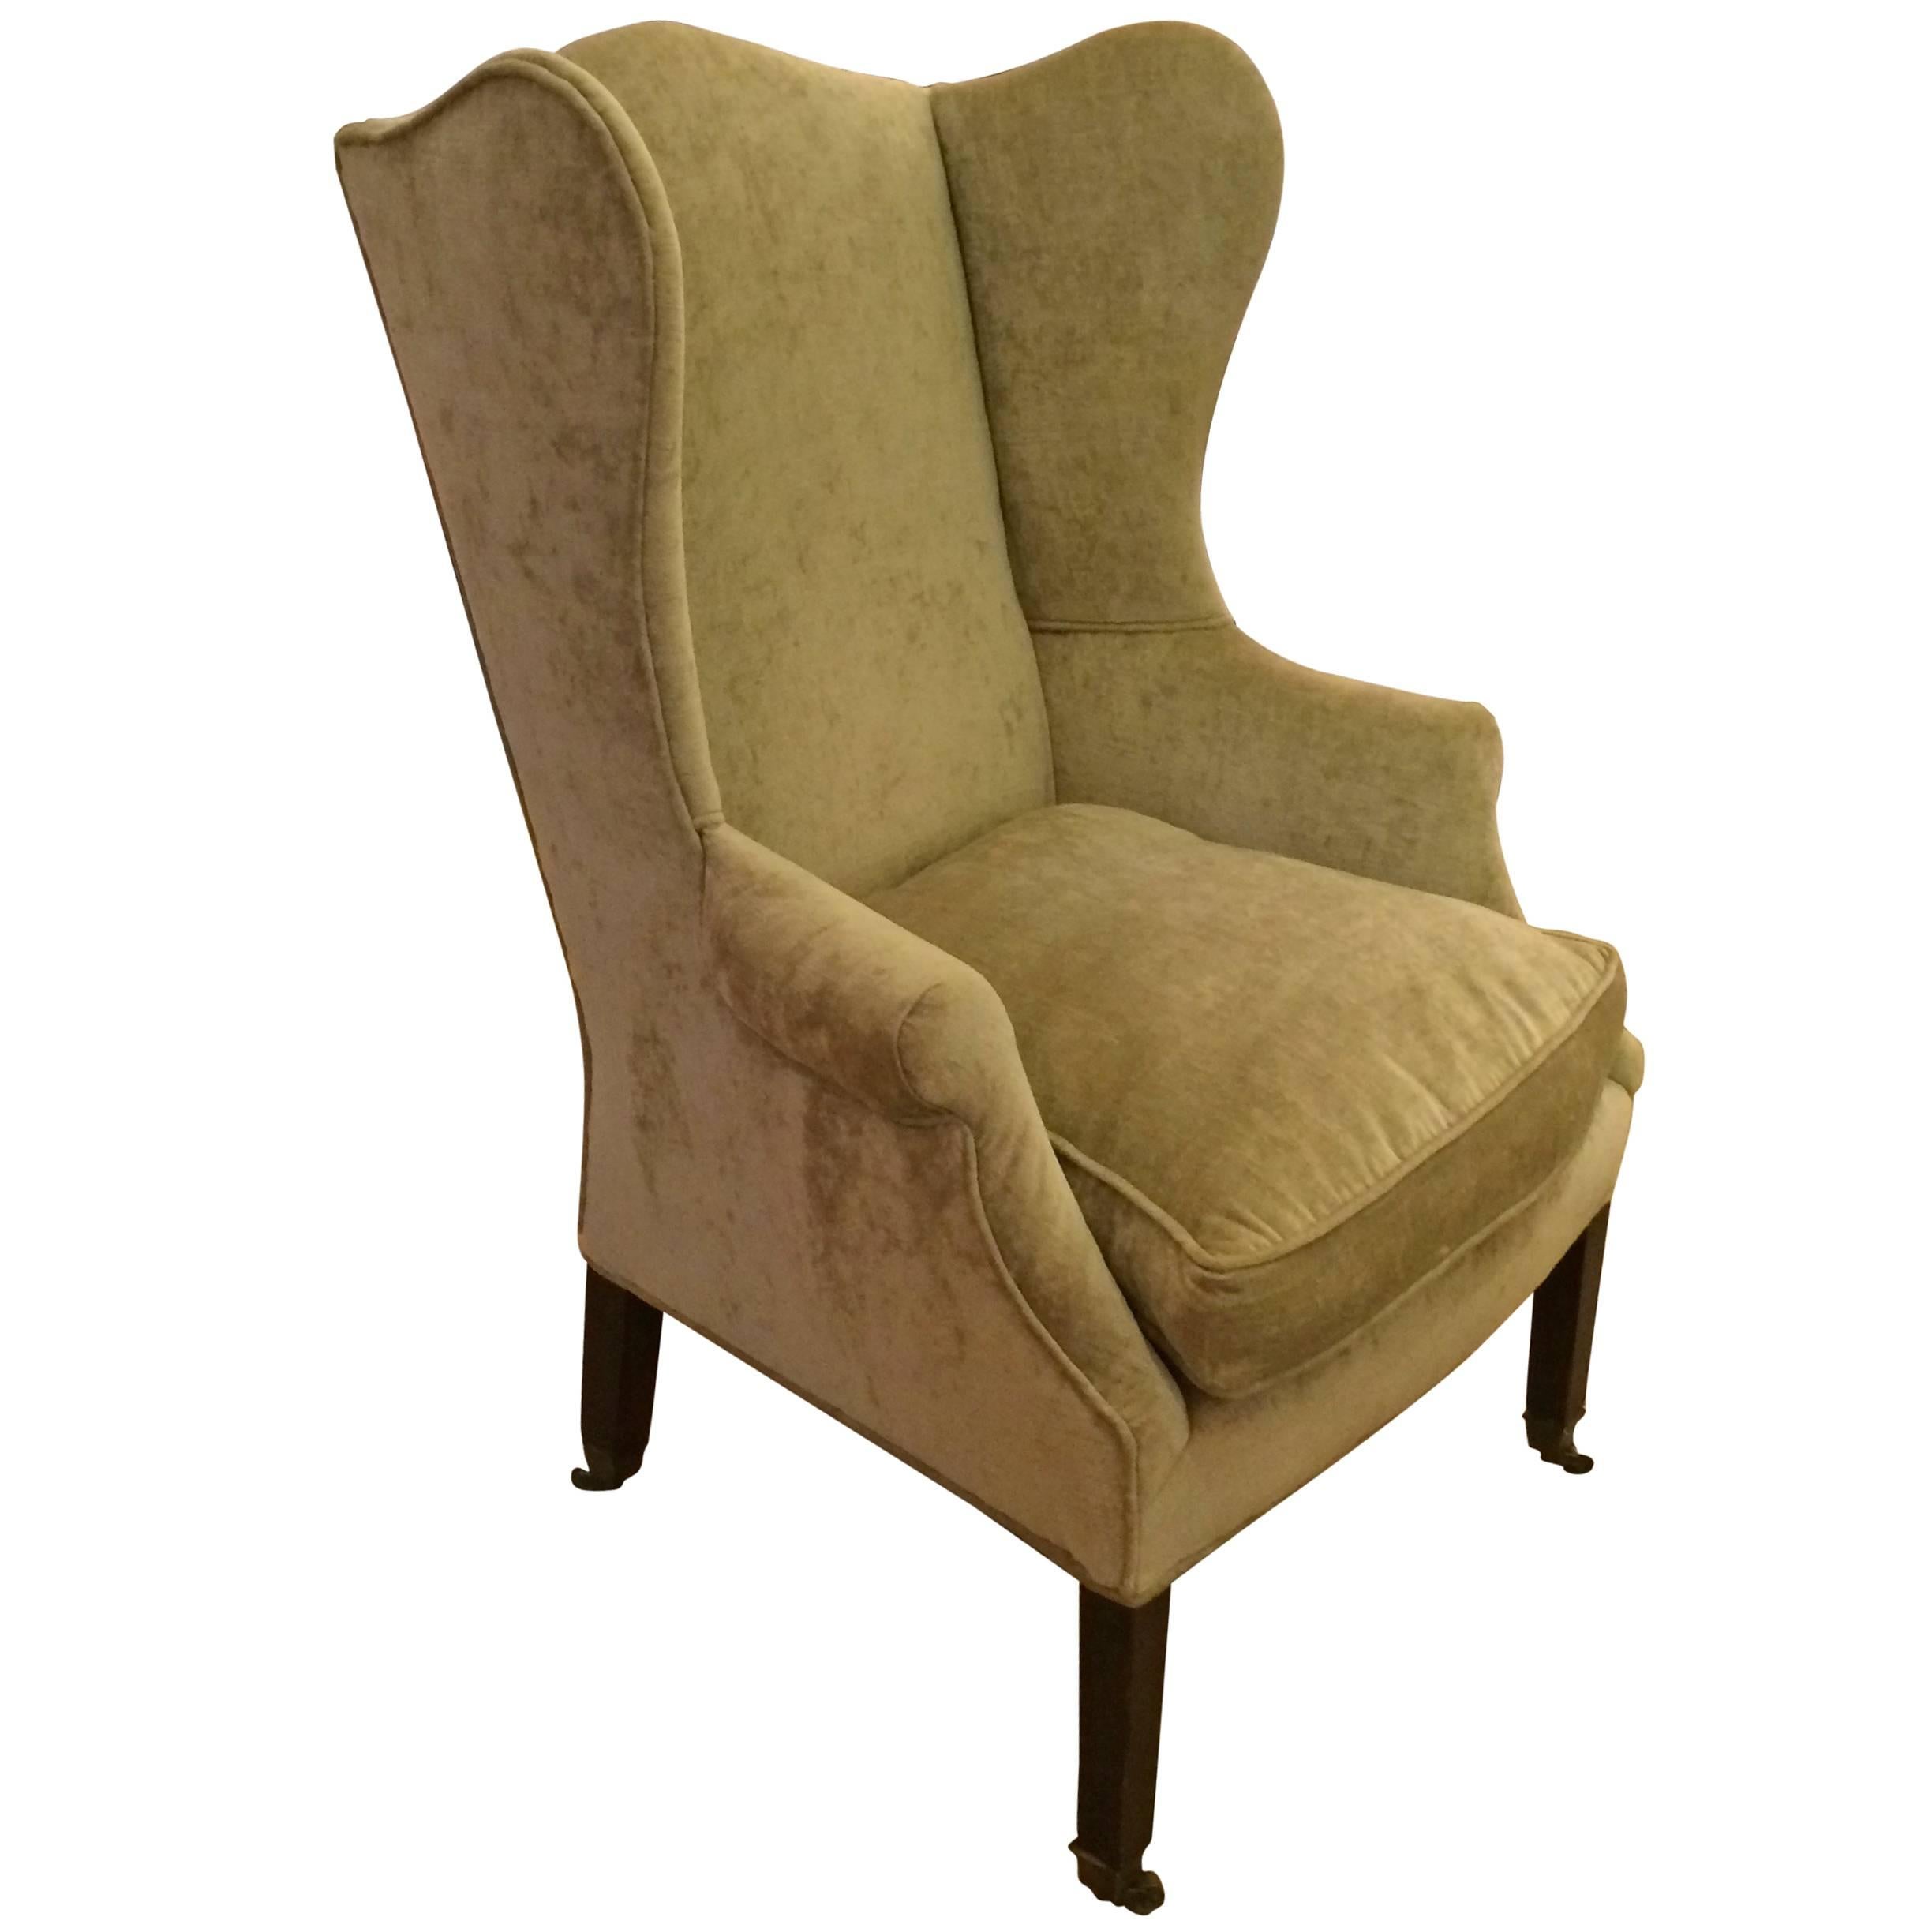 Lovely Antique 19th Century Chippendale Wing Chair in Sage Velvet